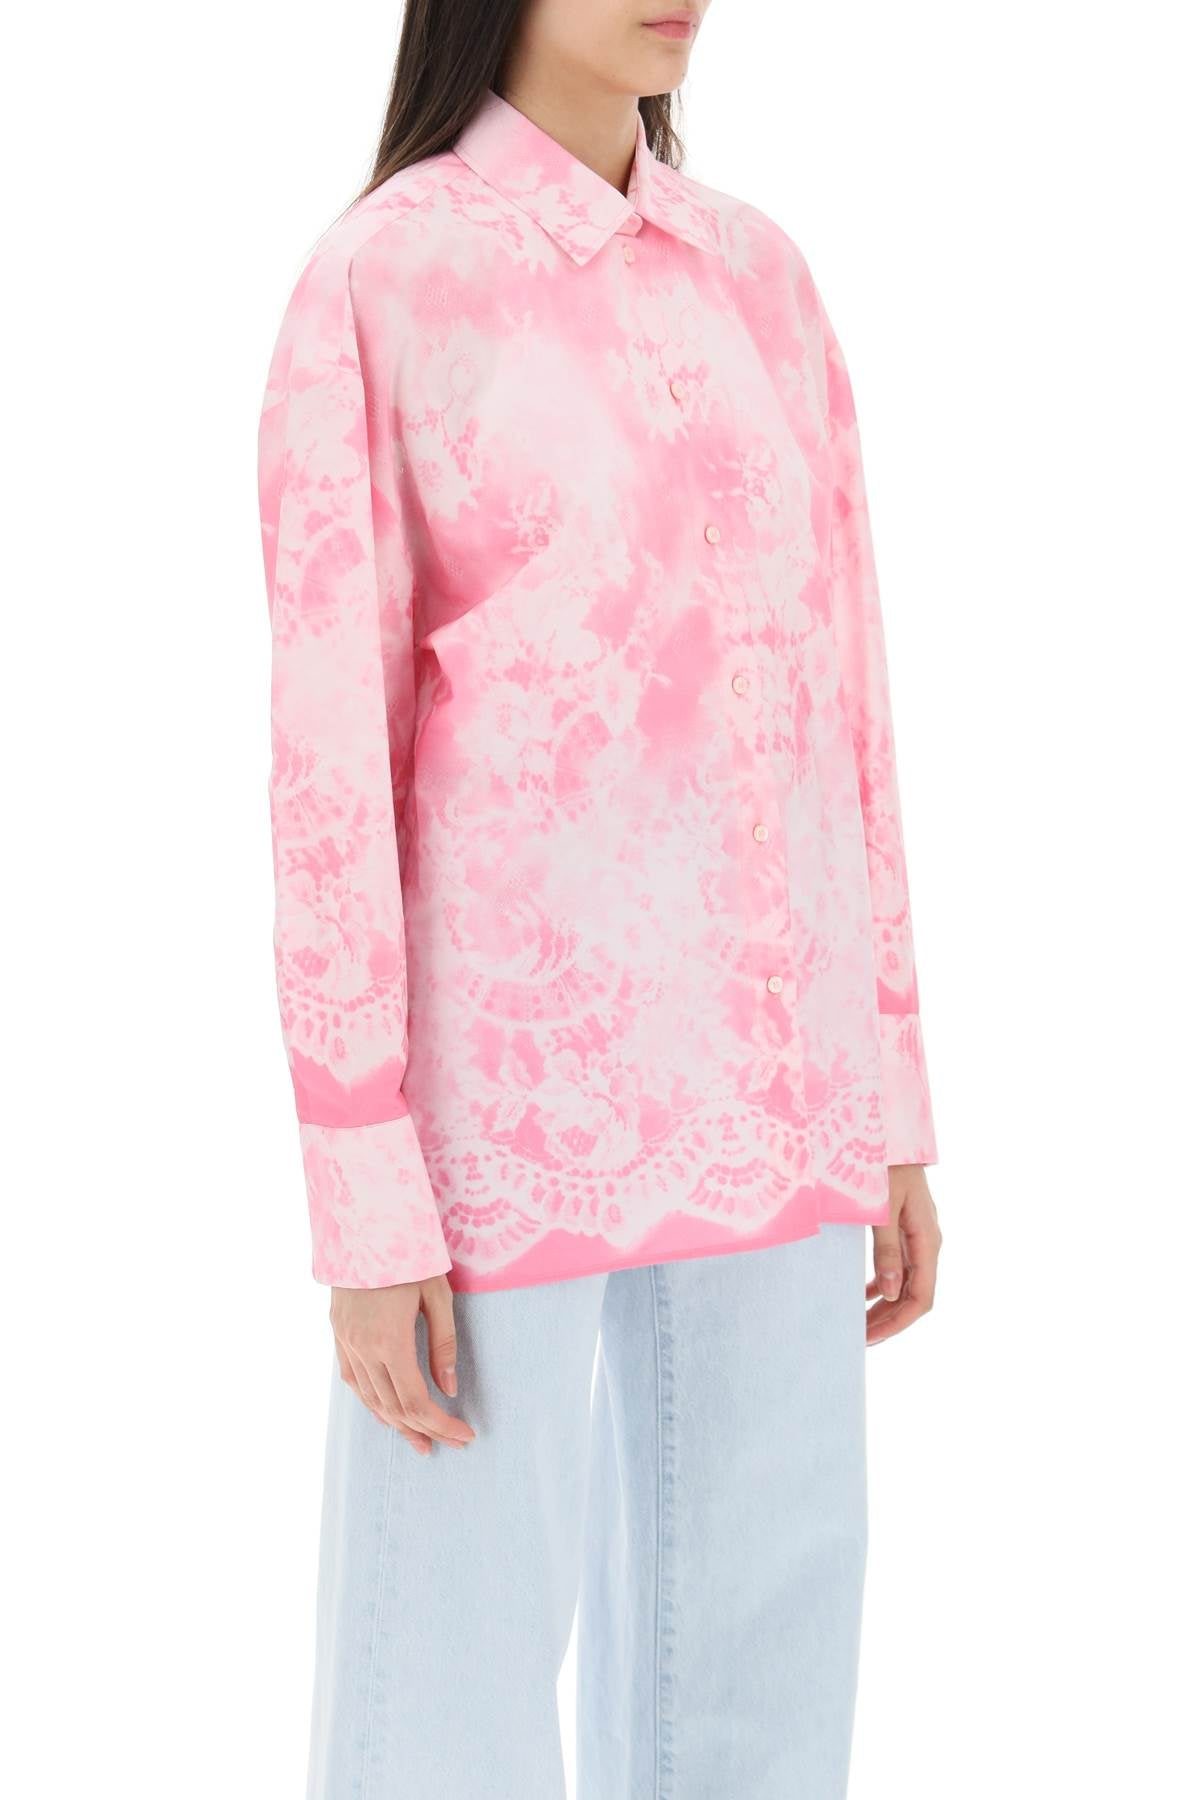 Msgm oversized shirt with all-over print-1